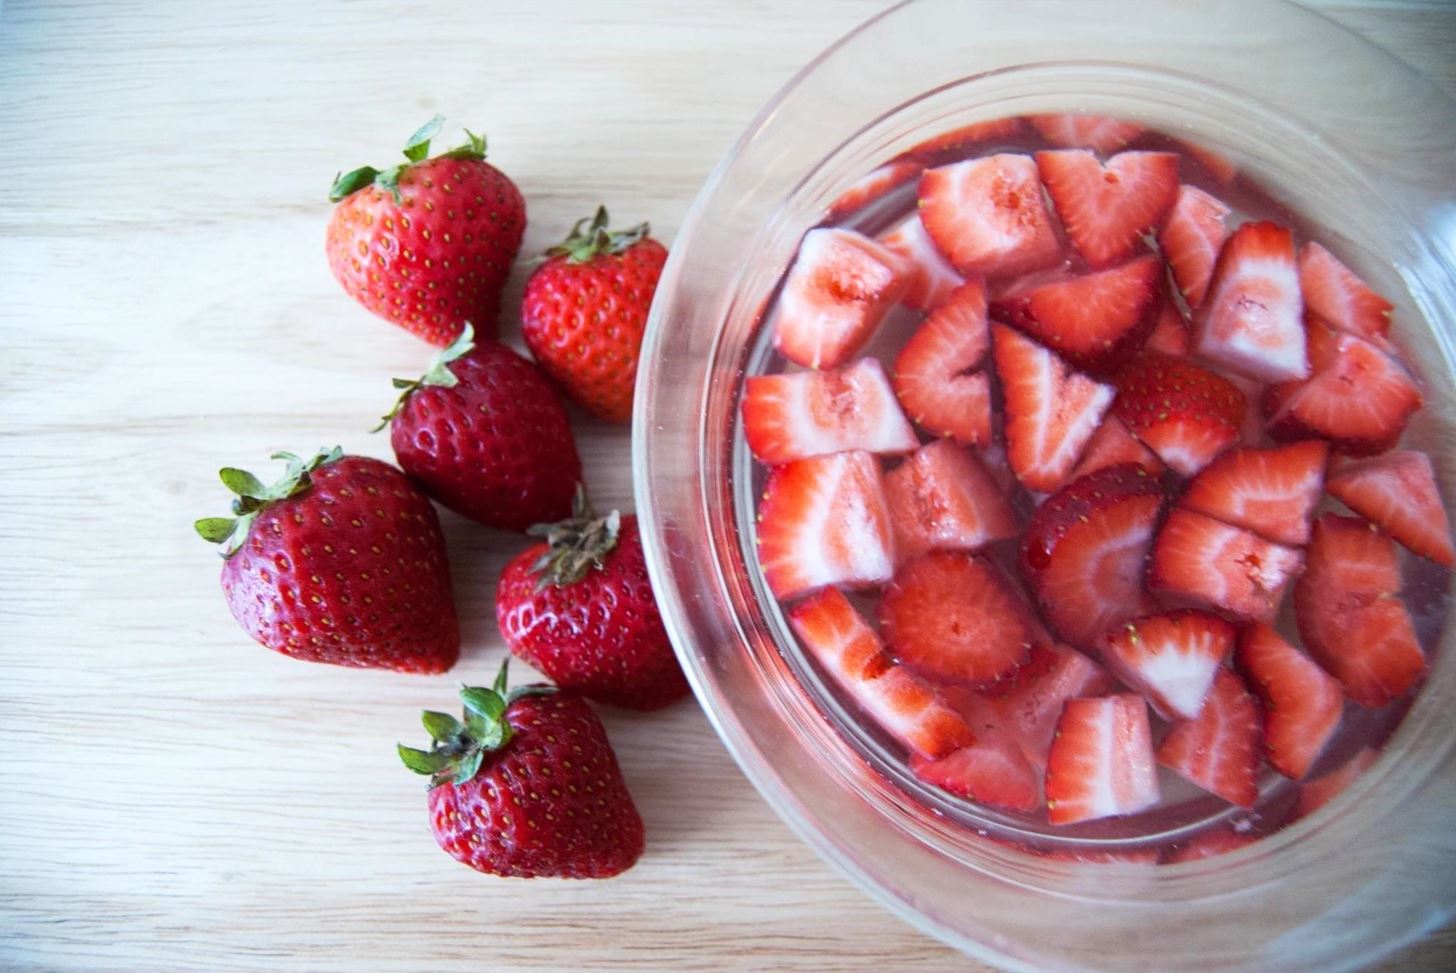 10 Ways to Take Your Summer Fruit Salad from Mediocre to Masterpiece